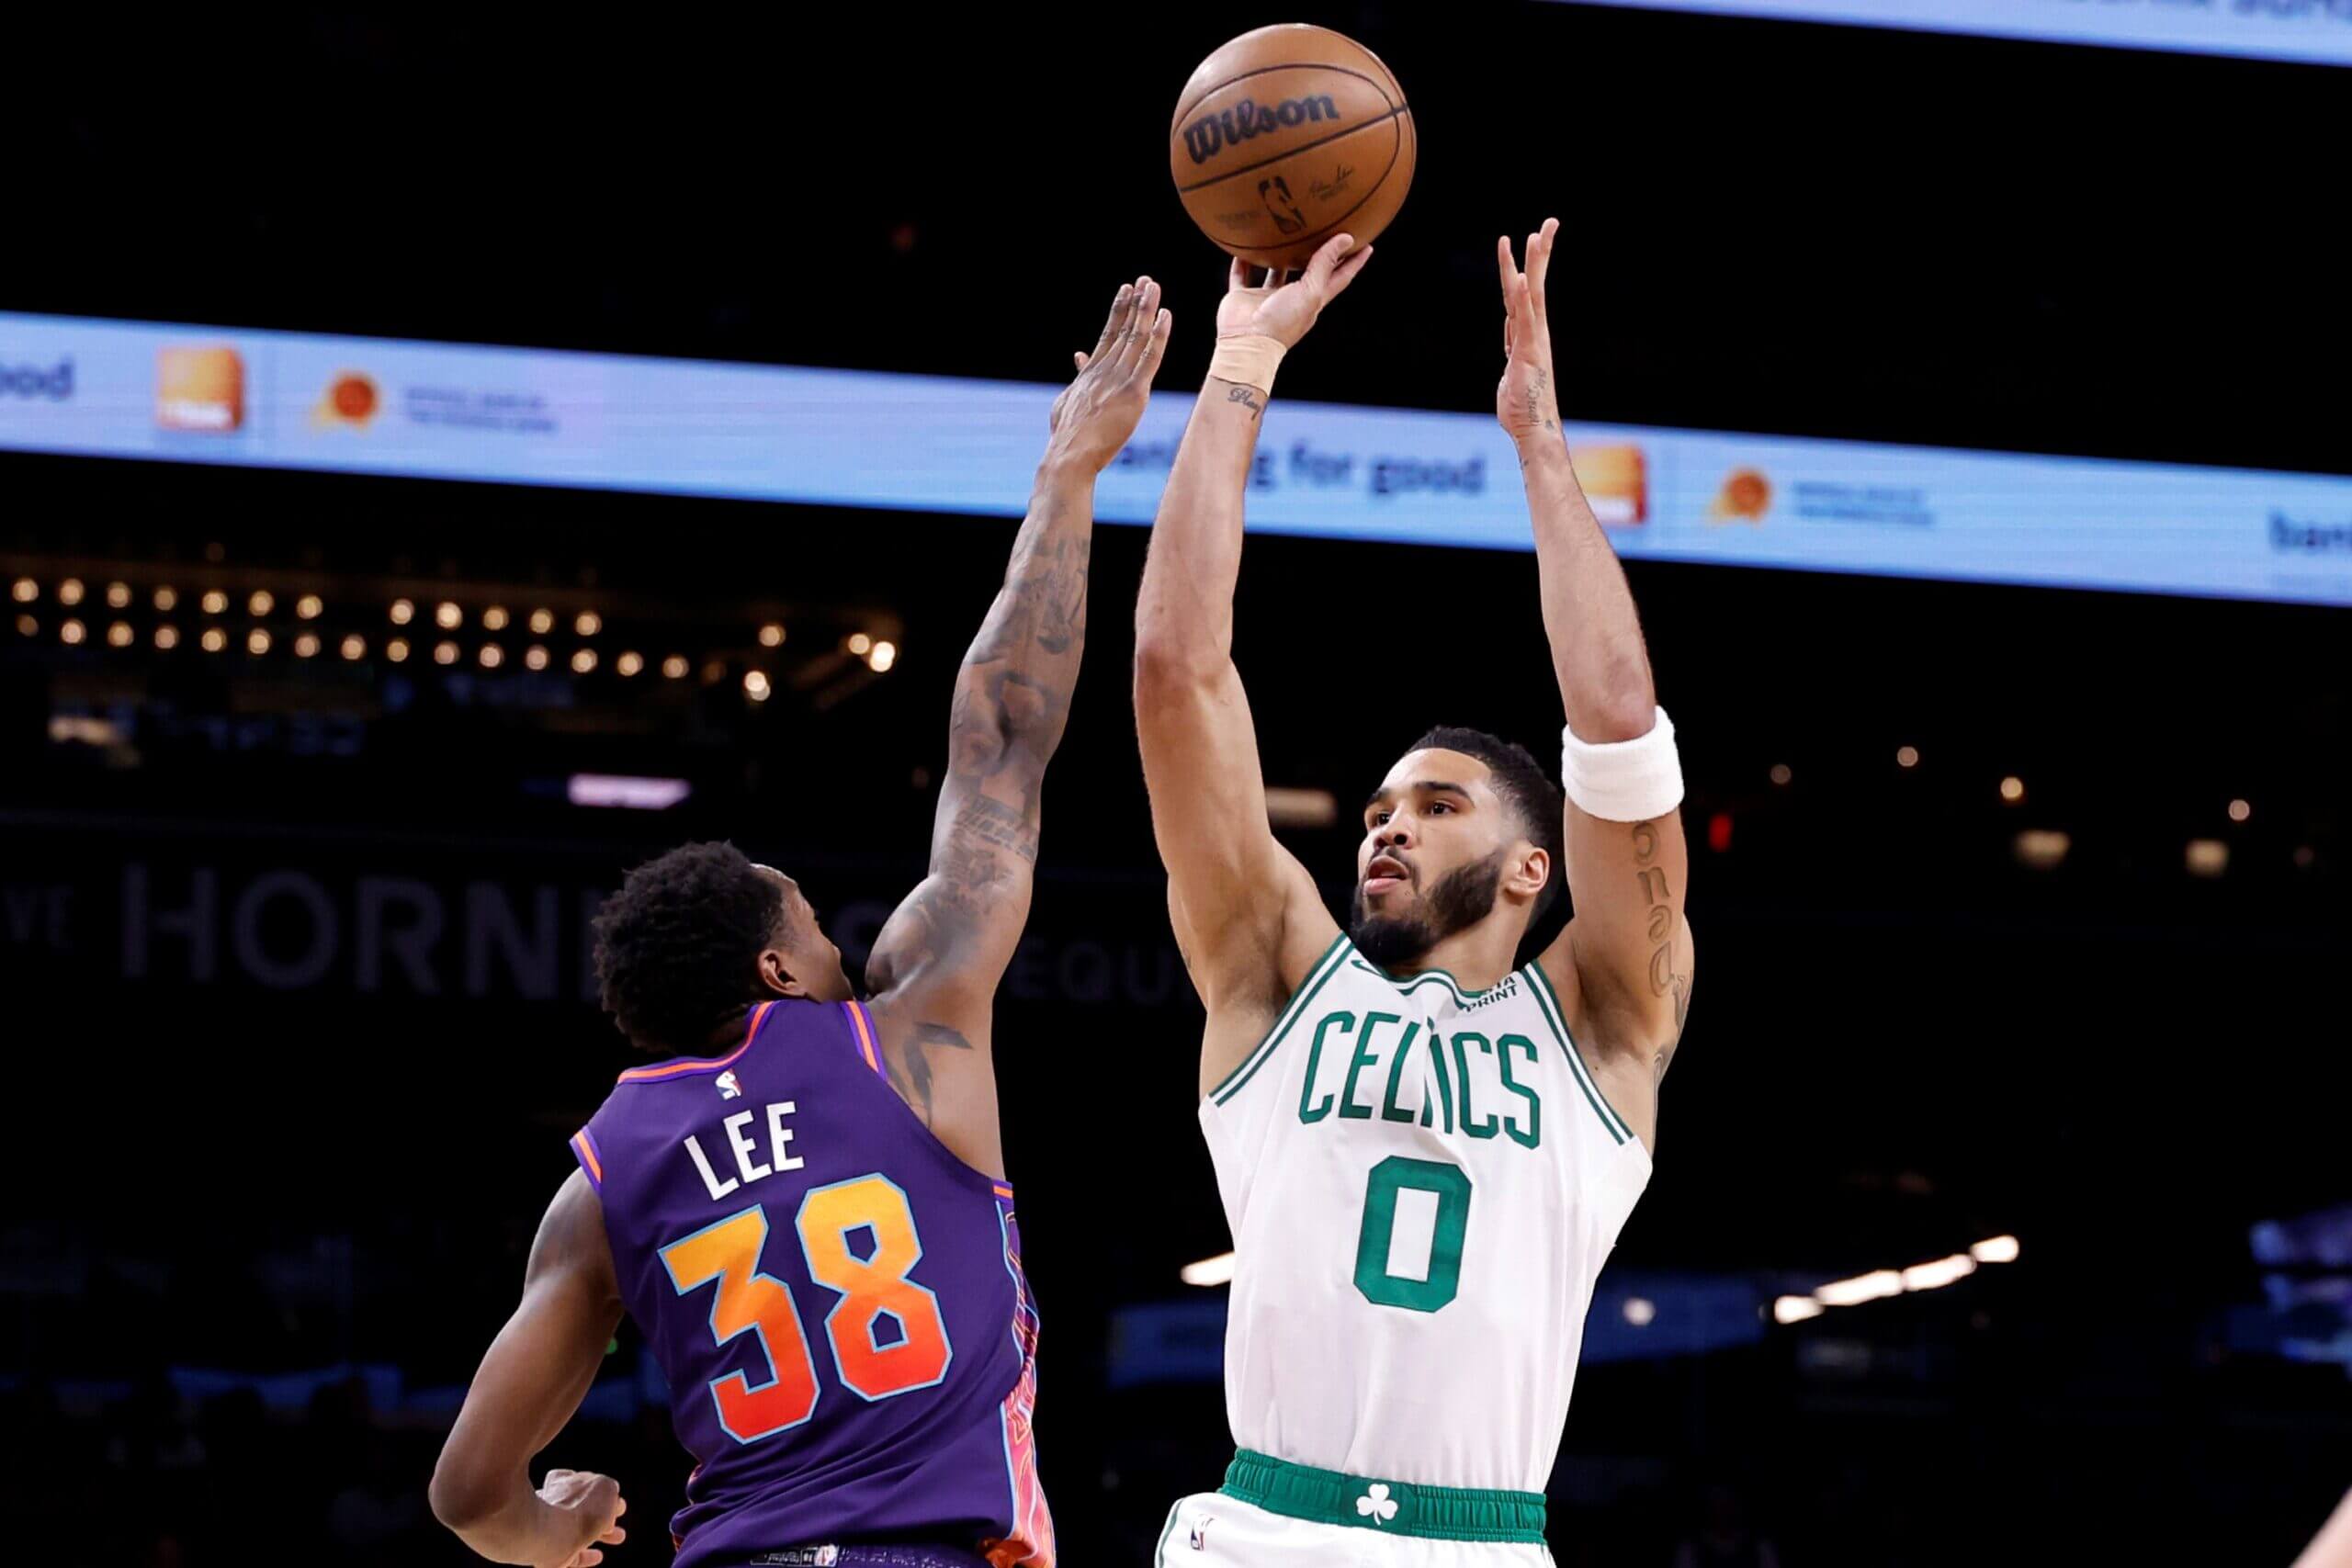 After consecutive losses, Celtics ‘wanted to respond with a win.’ They did that in Phoenix